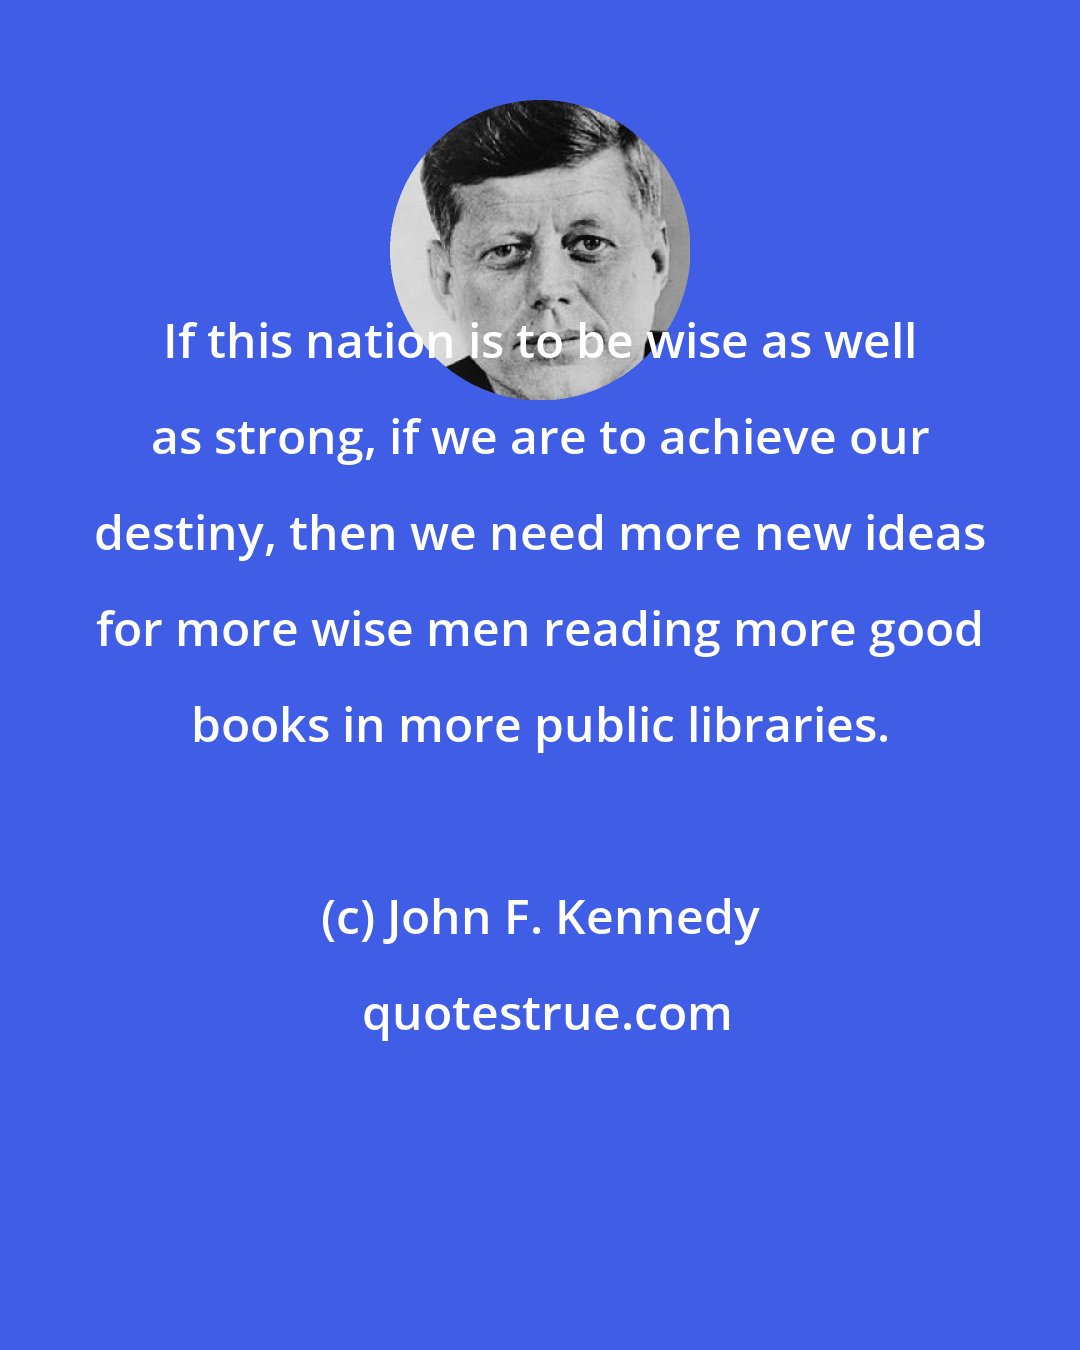 John F. Kennedy: If this nation is to be wise as well as strong, if we are to achieve our destiny, then we need more new ideas for more wise men reading more good books in more public libraries.